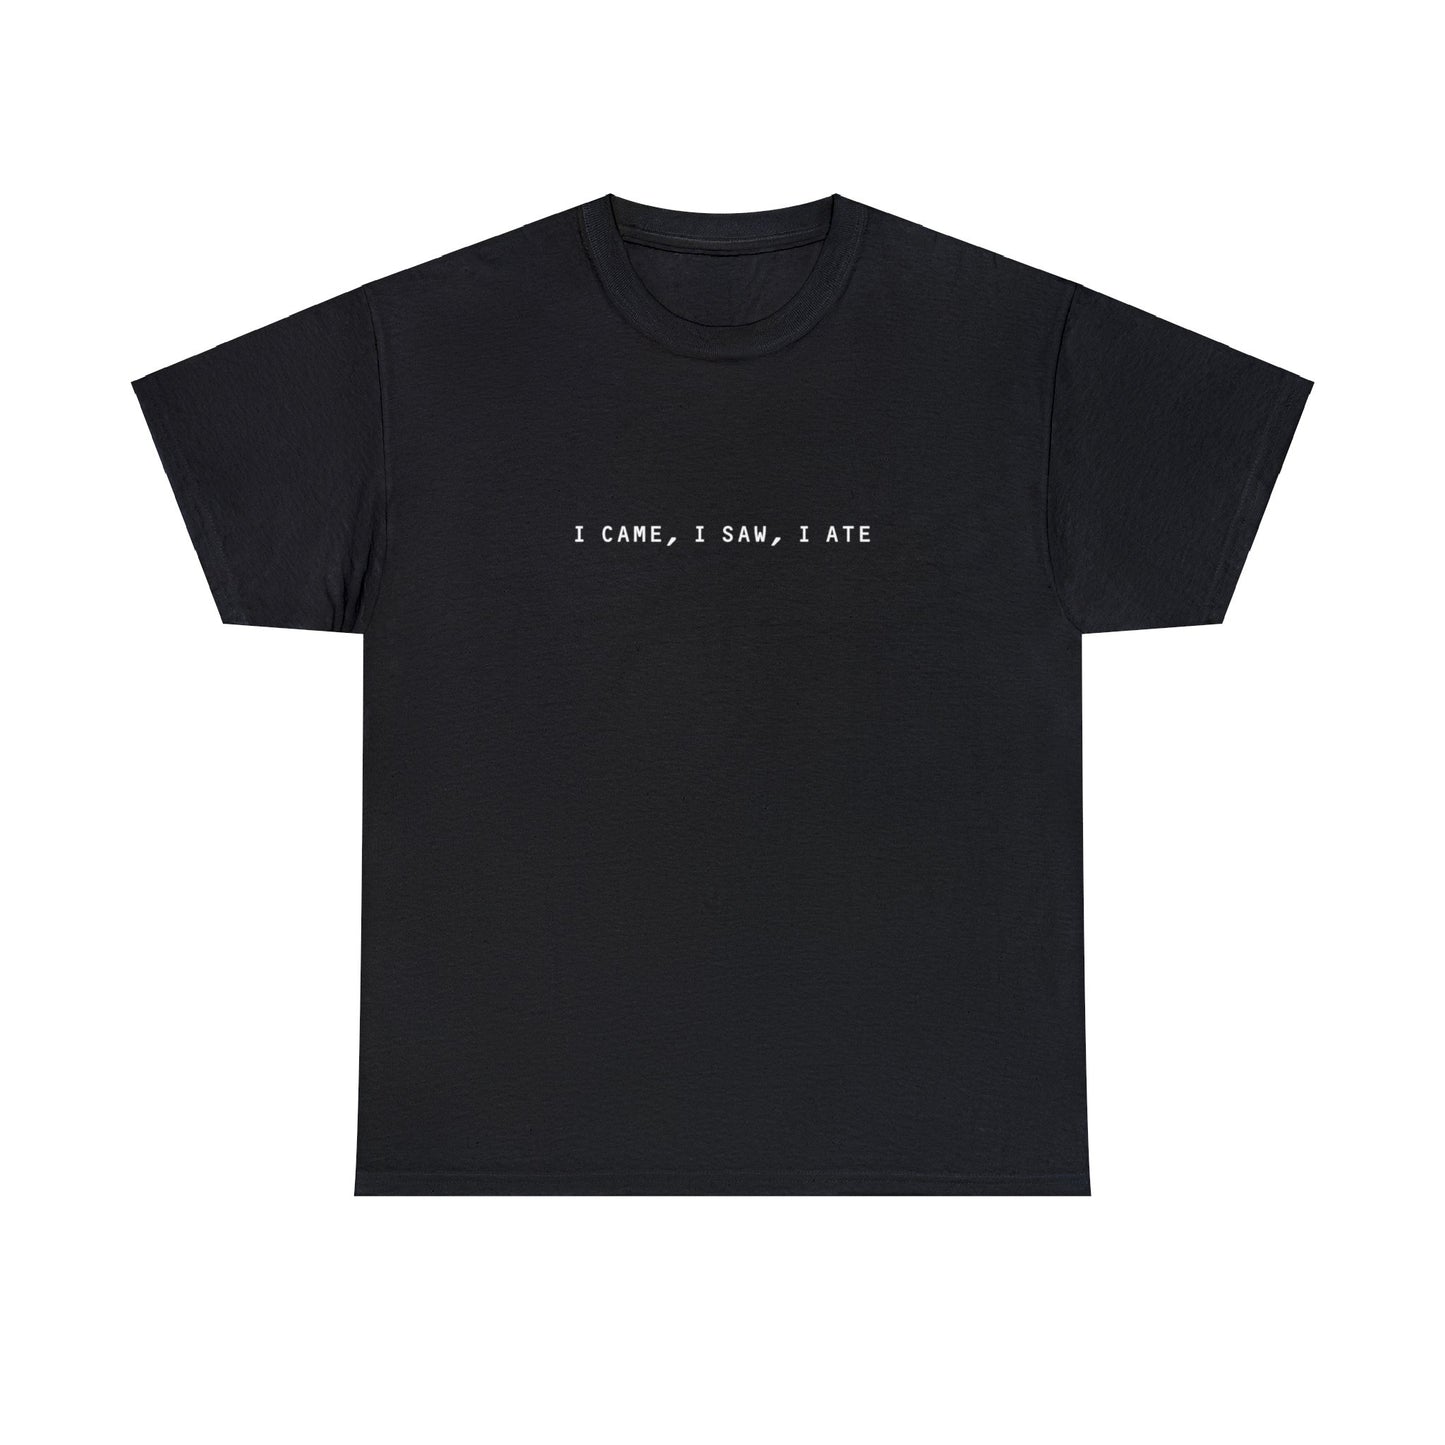 "I CAME, I SAW, I ATE" Text T-shirt Unisex Heavy Cotton Tee Simple Text for Travelers